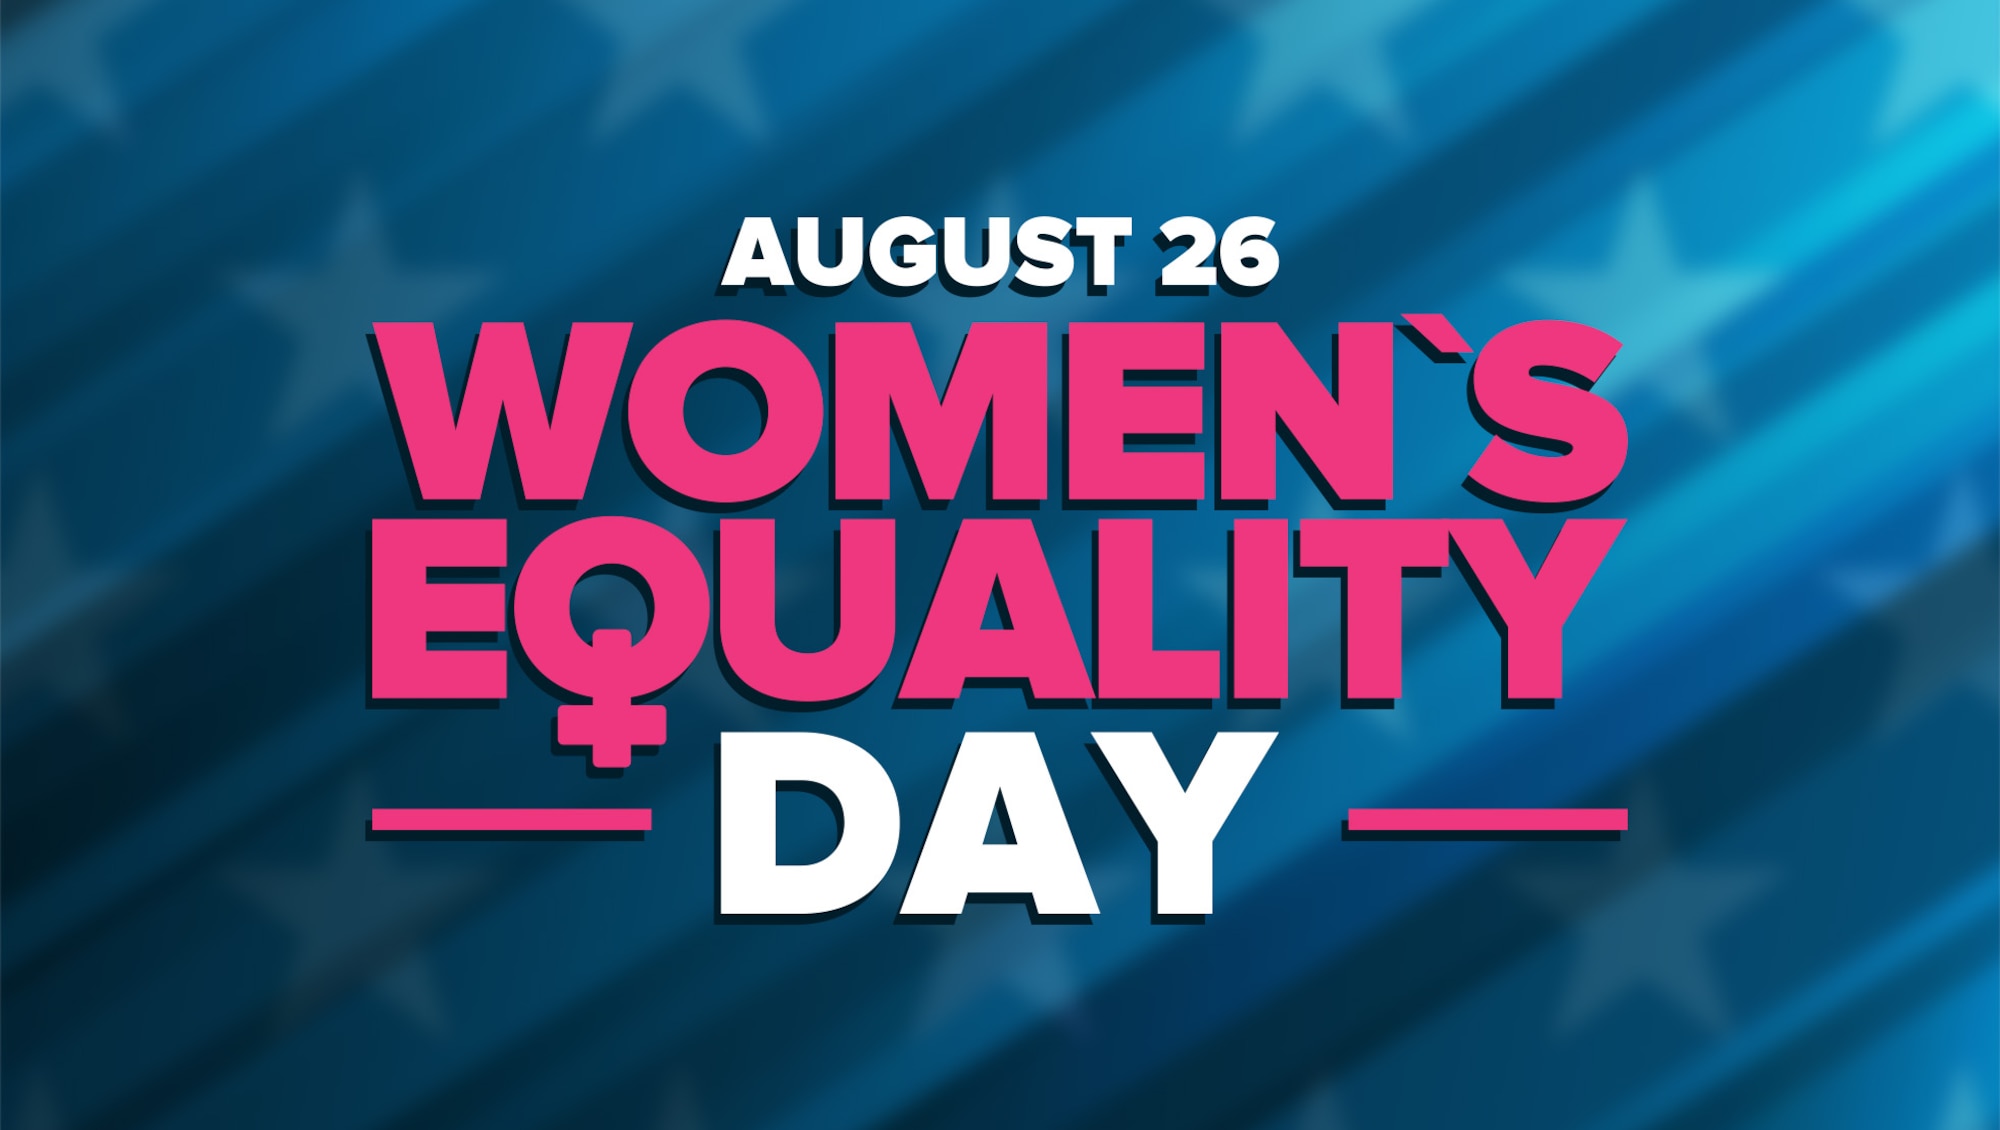 Women's Equality Day is celebrated annually in the United States on August 26, commemorating the passage of the 19th Amendment to the U.S. Constitution which granted women the right to vote. (U.S. Air Force graphic by David Perry)